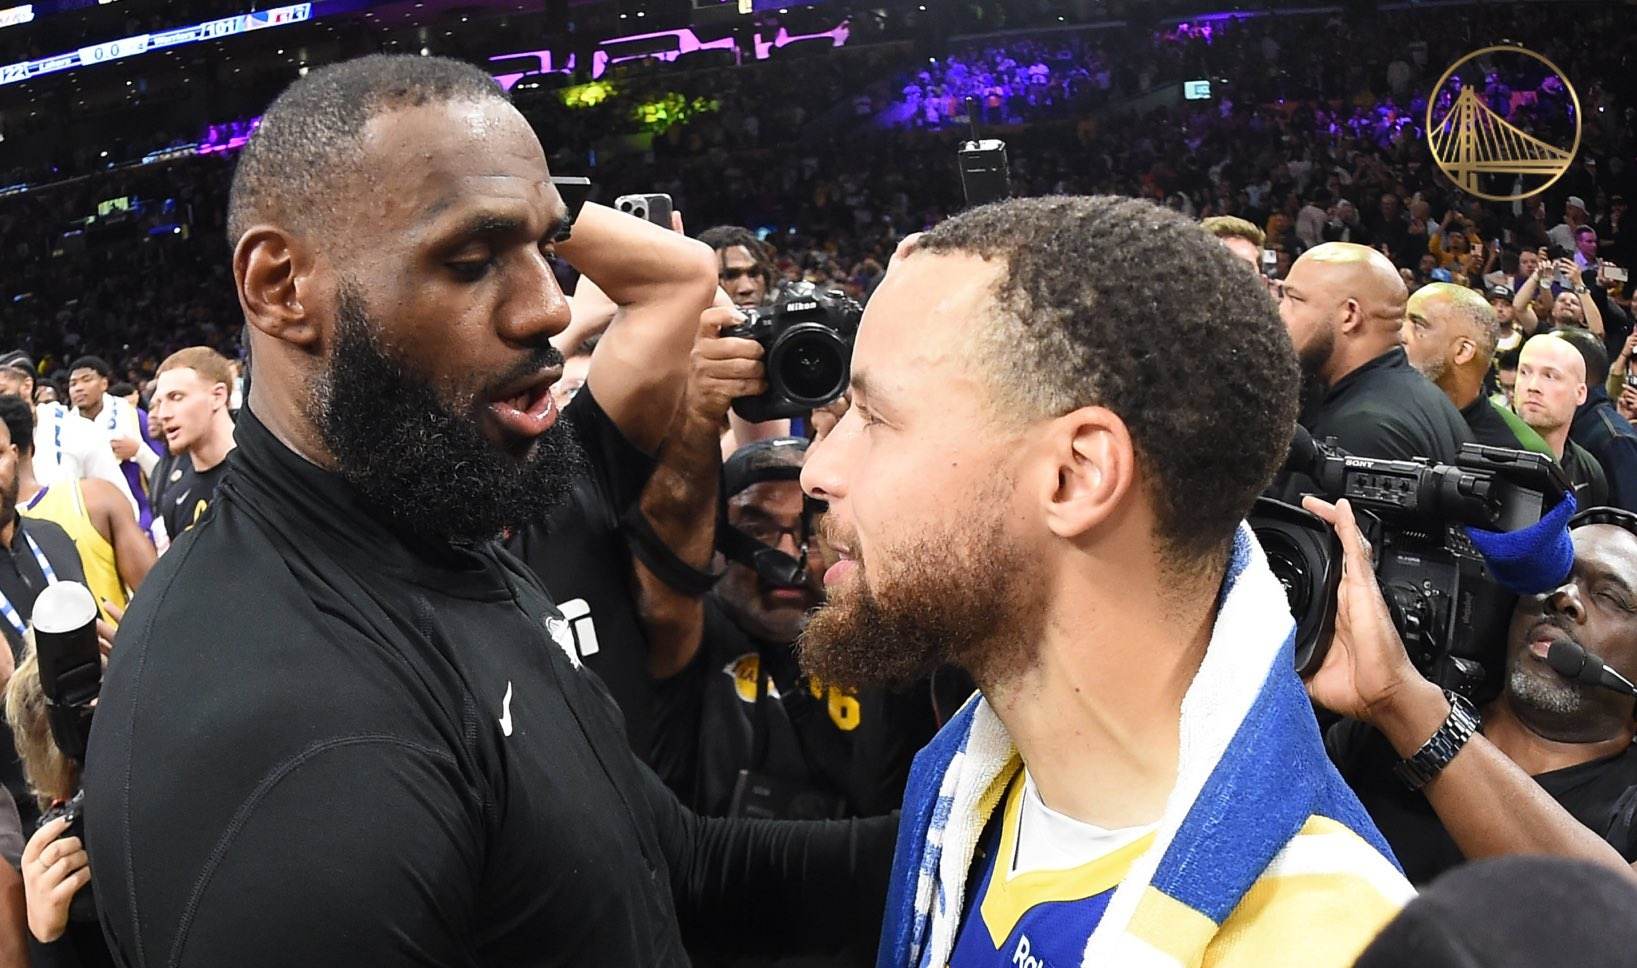 Lakers-Warriors semi-final with record viewership